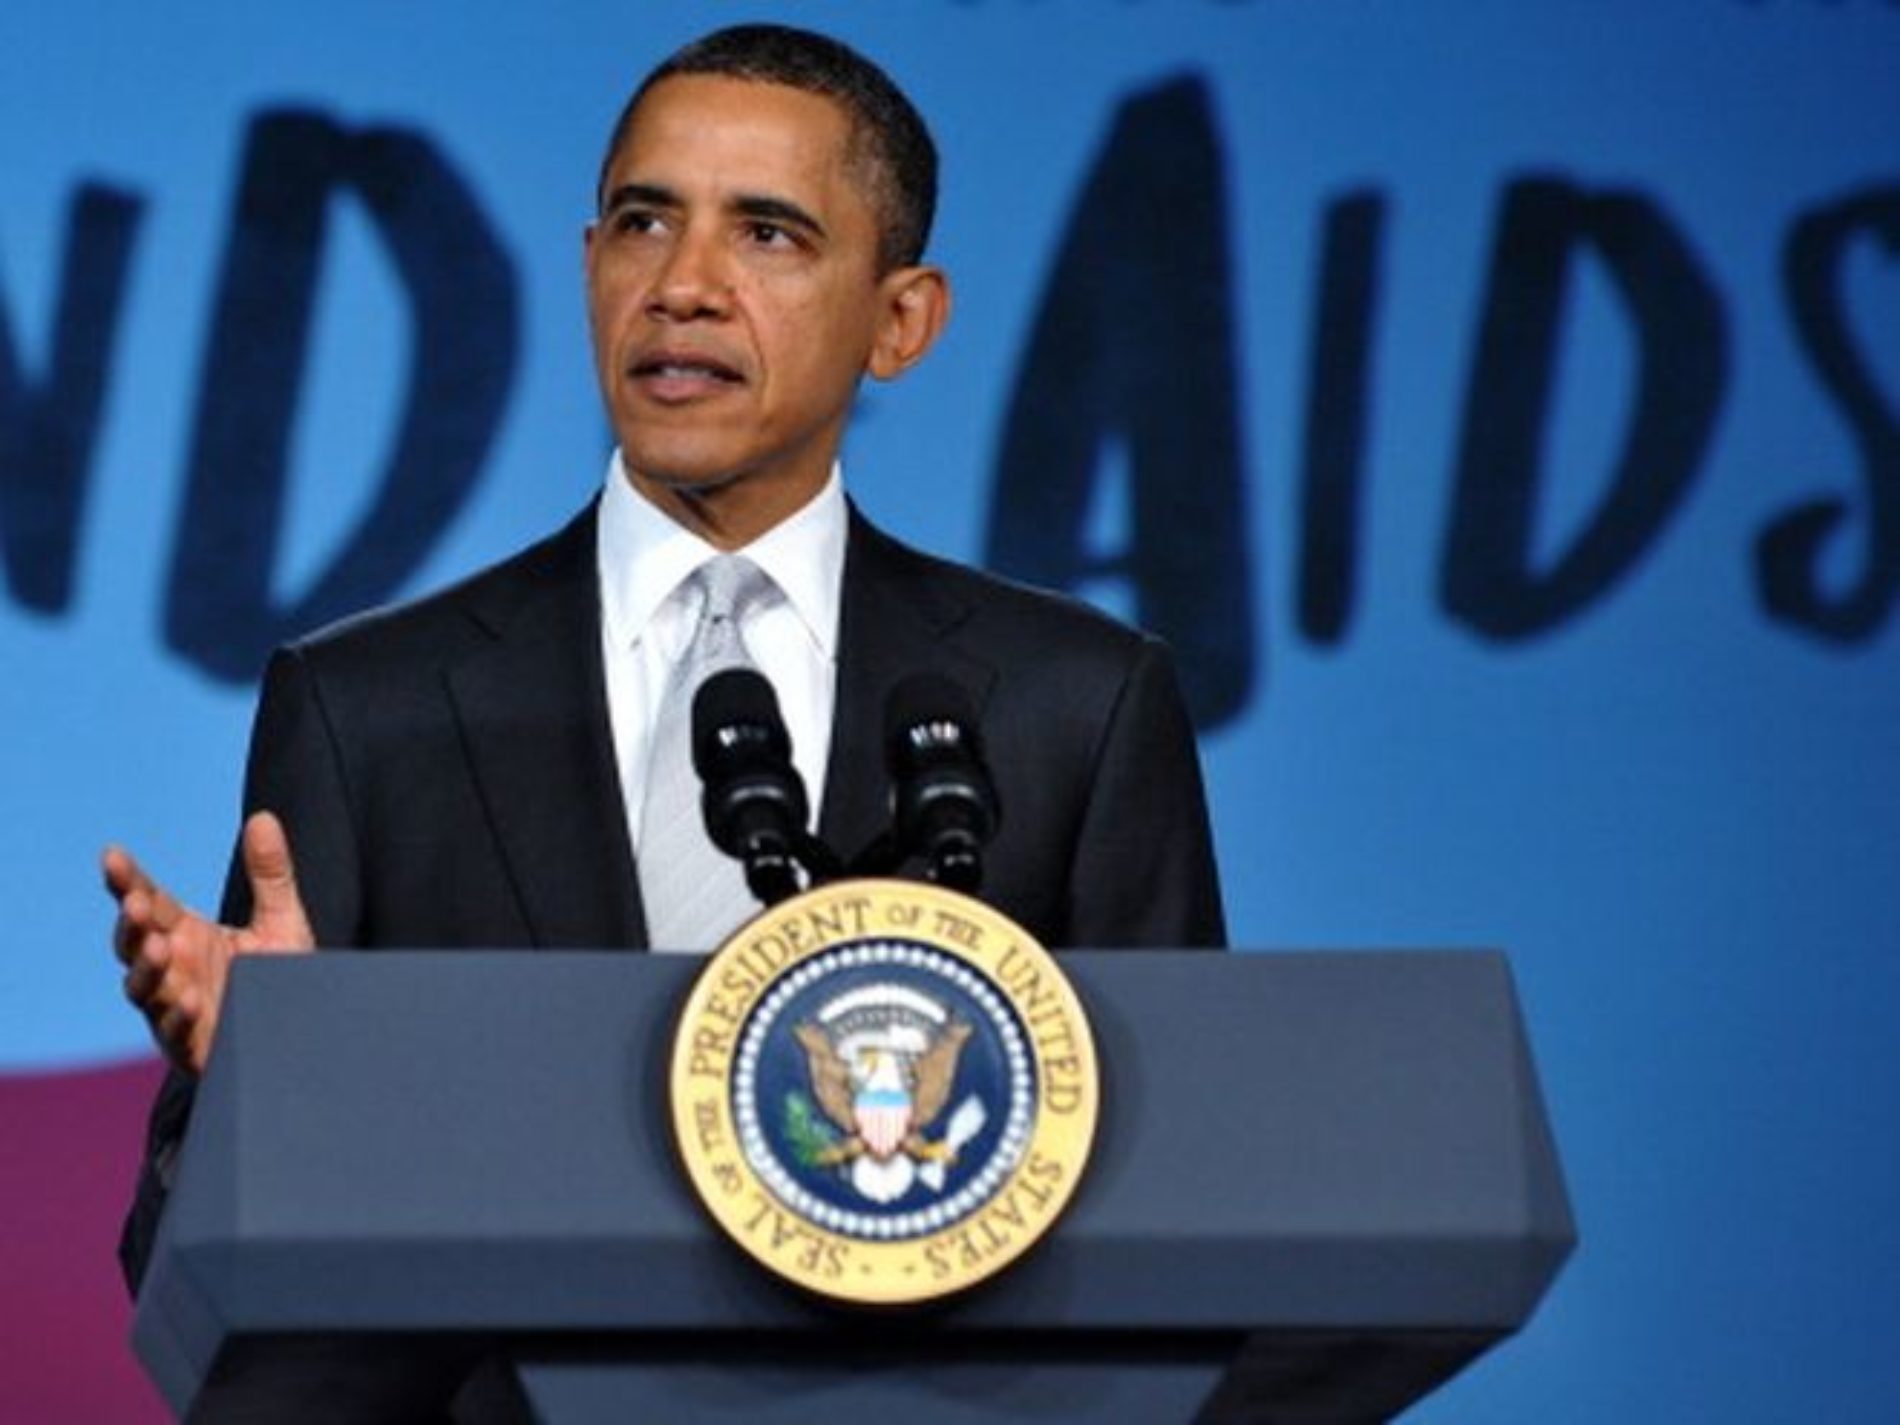 President Obama Issues Final ‘World AIDS Day’ Proclamation